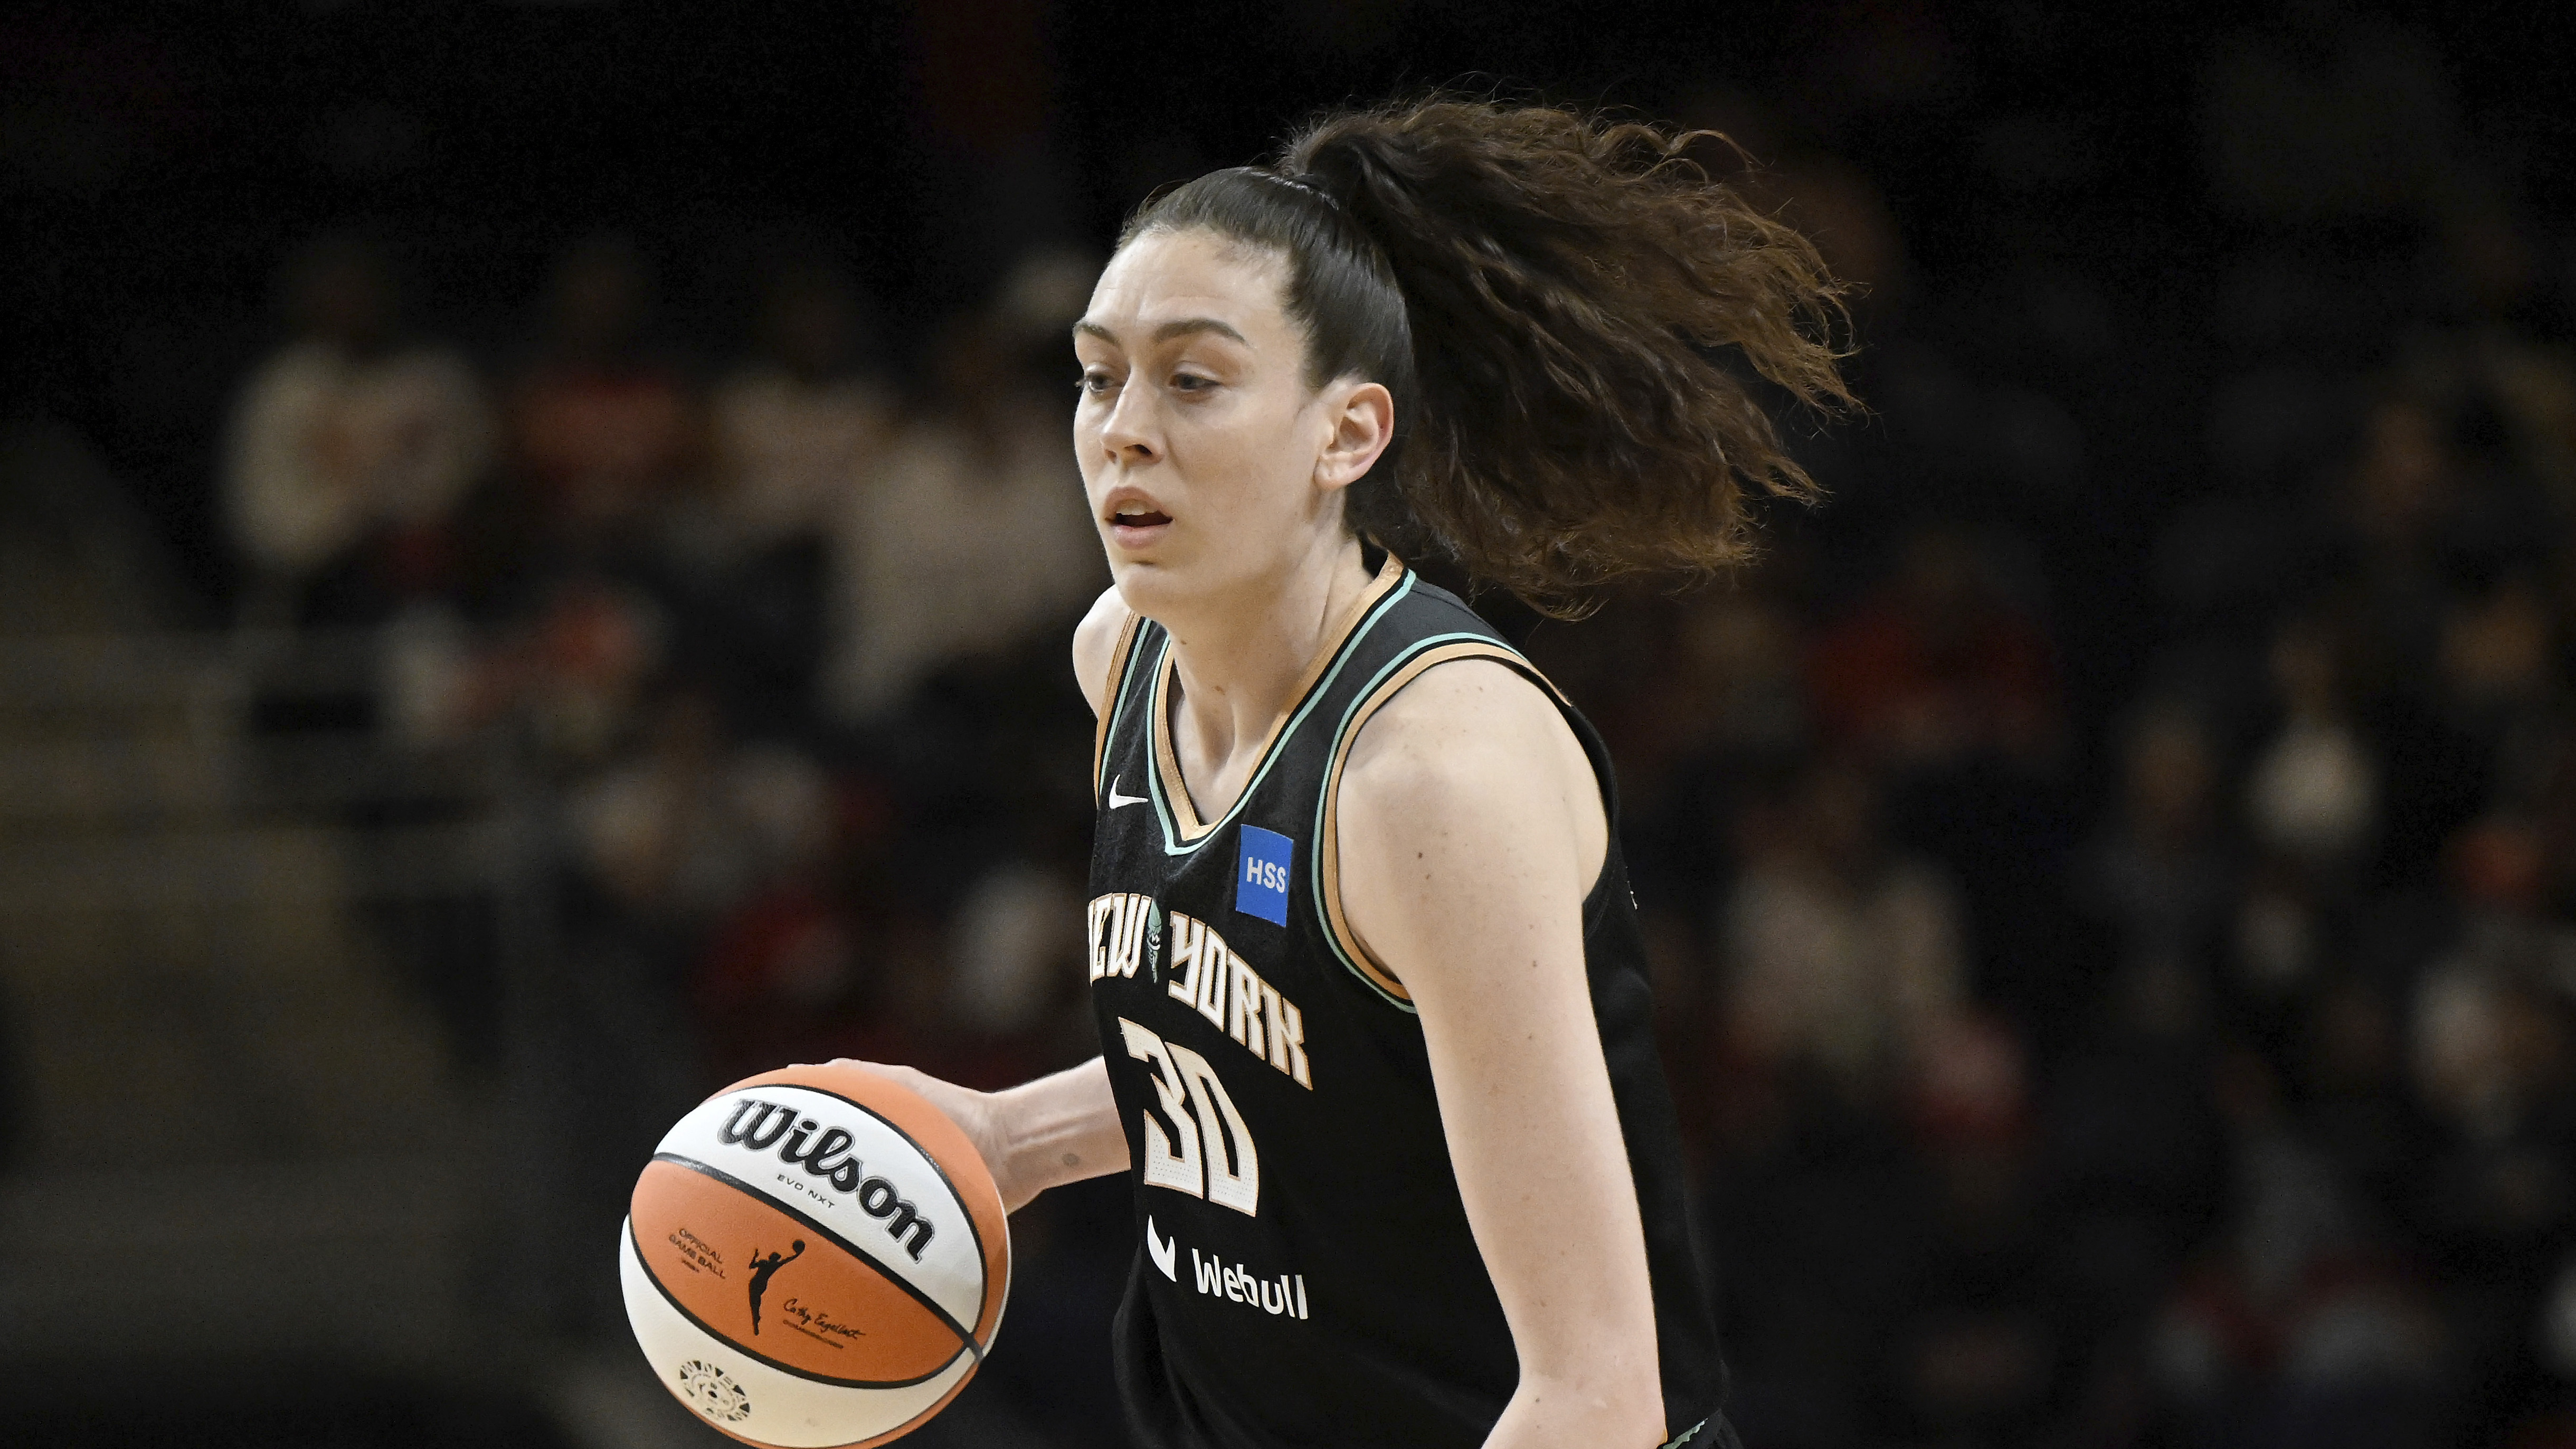 Saturday May 18 and Sunday May 19 have their own WNBA best bets, odds, and predictions - Key Players to Watch on Sunday May 19